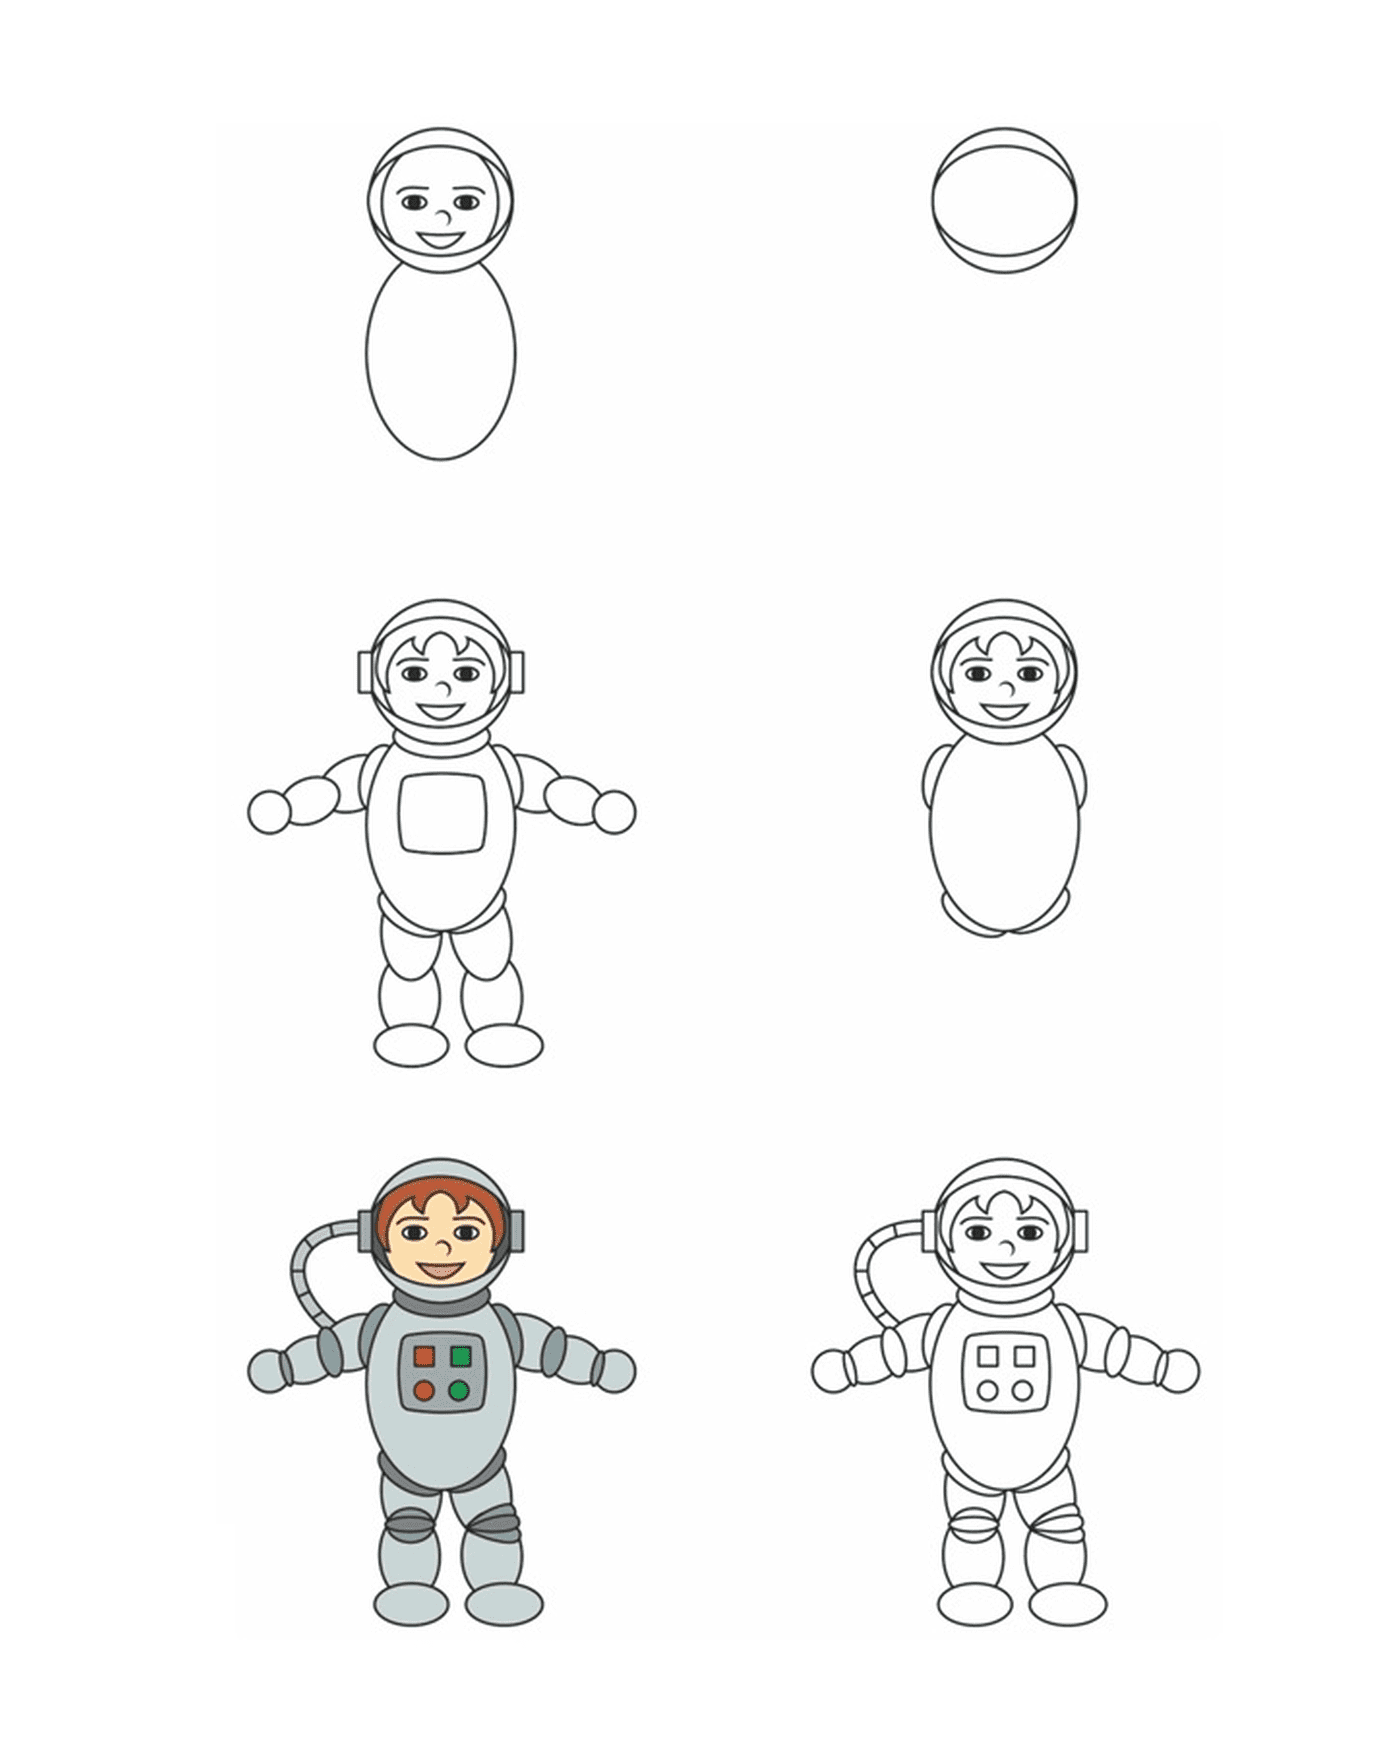  How to draw an astronaut 